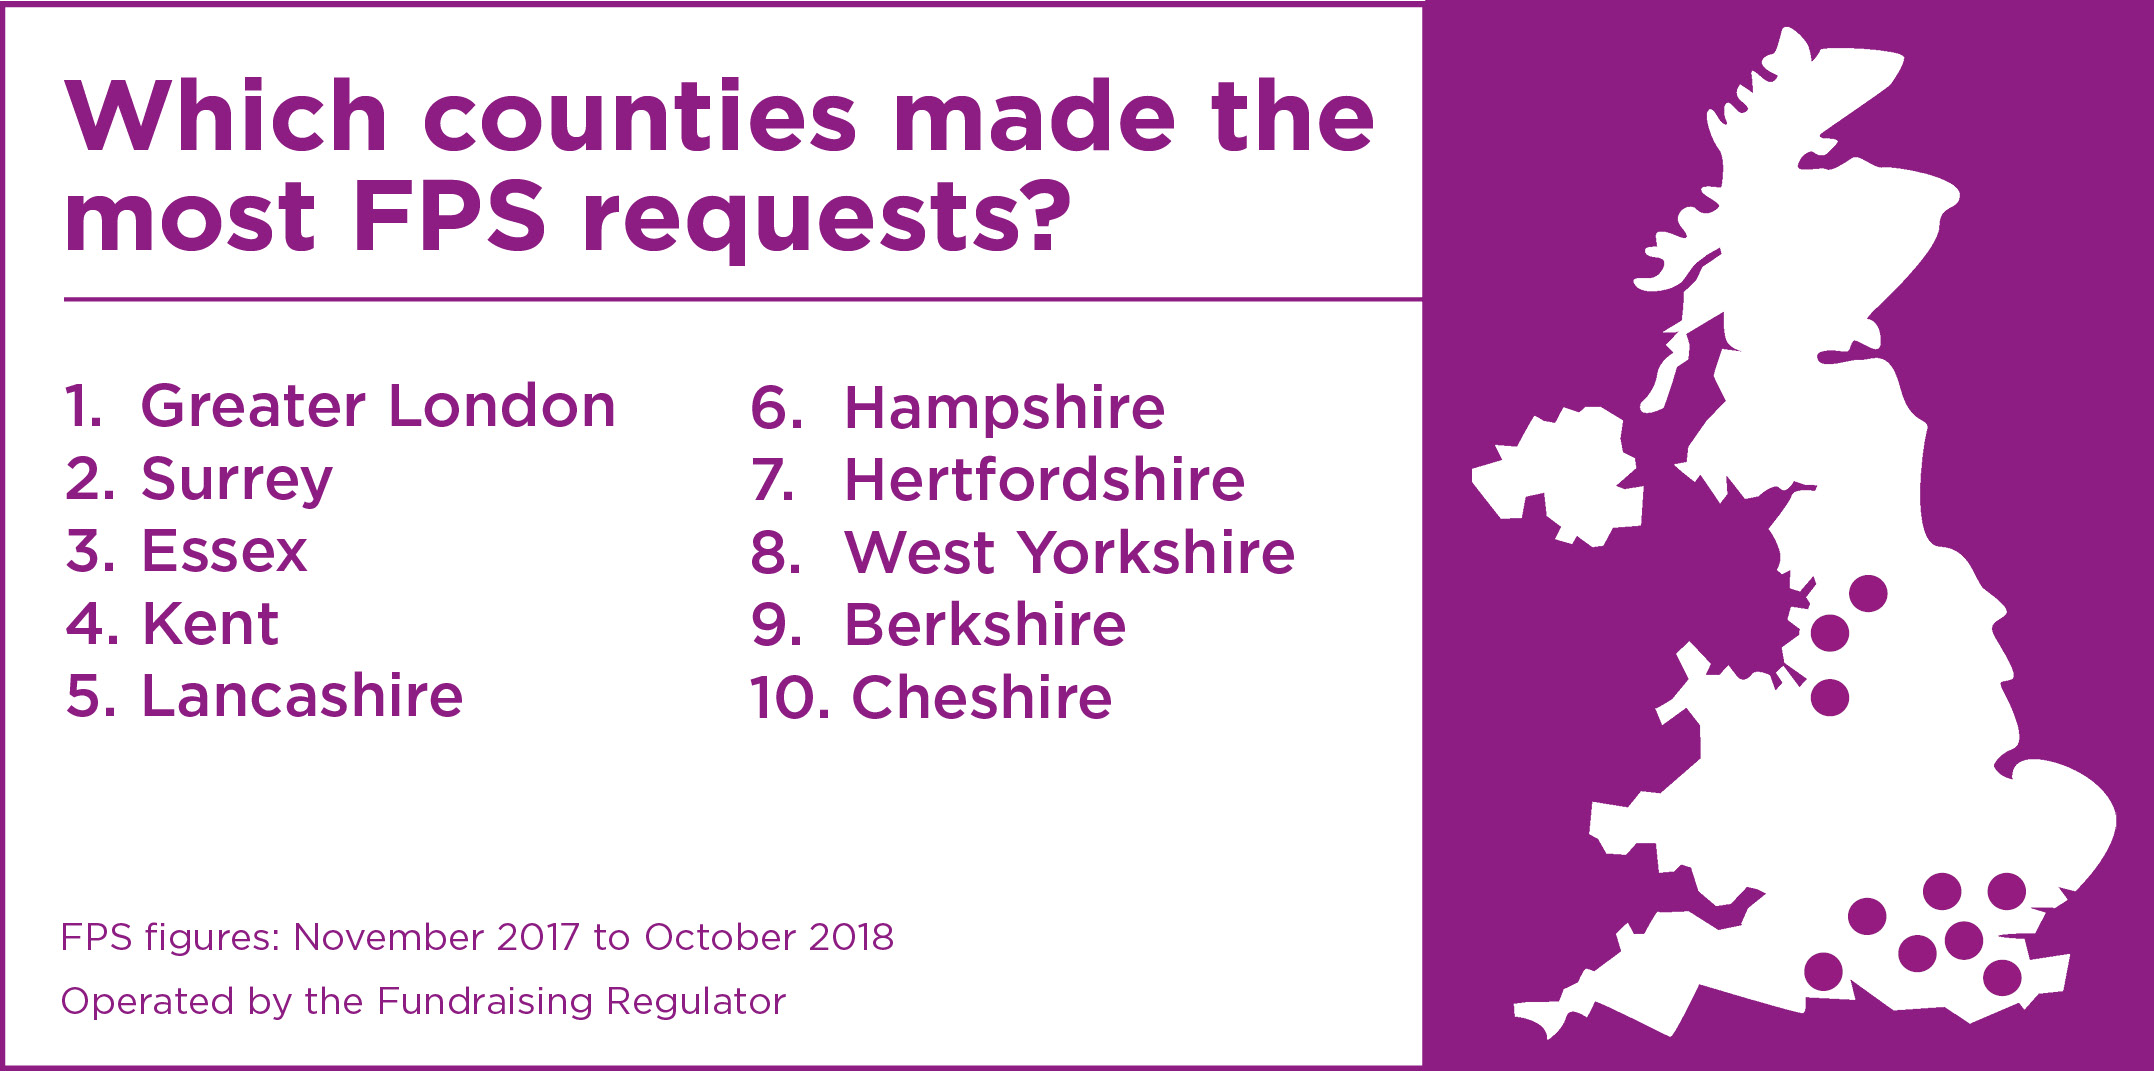 Which counties made the most FPS requests